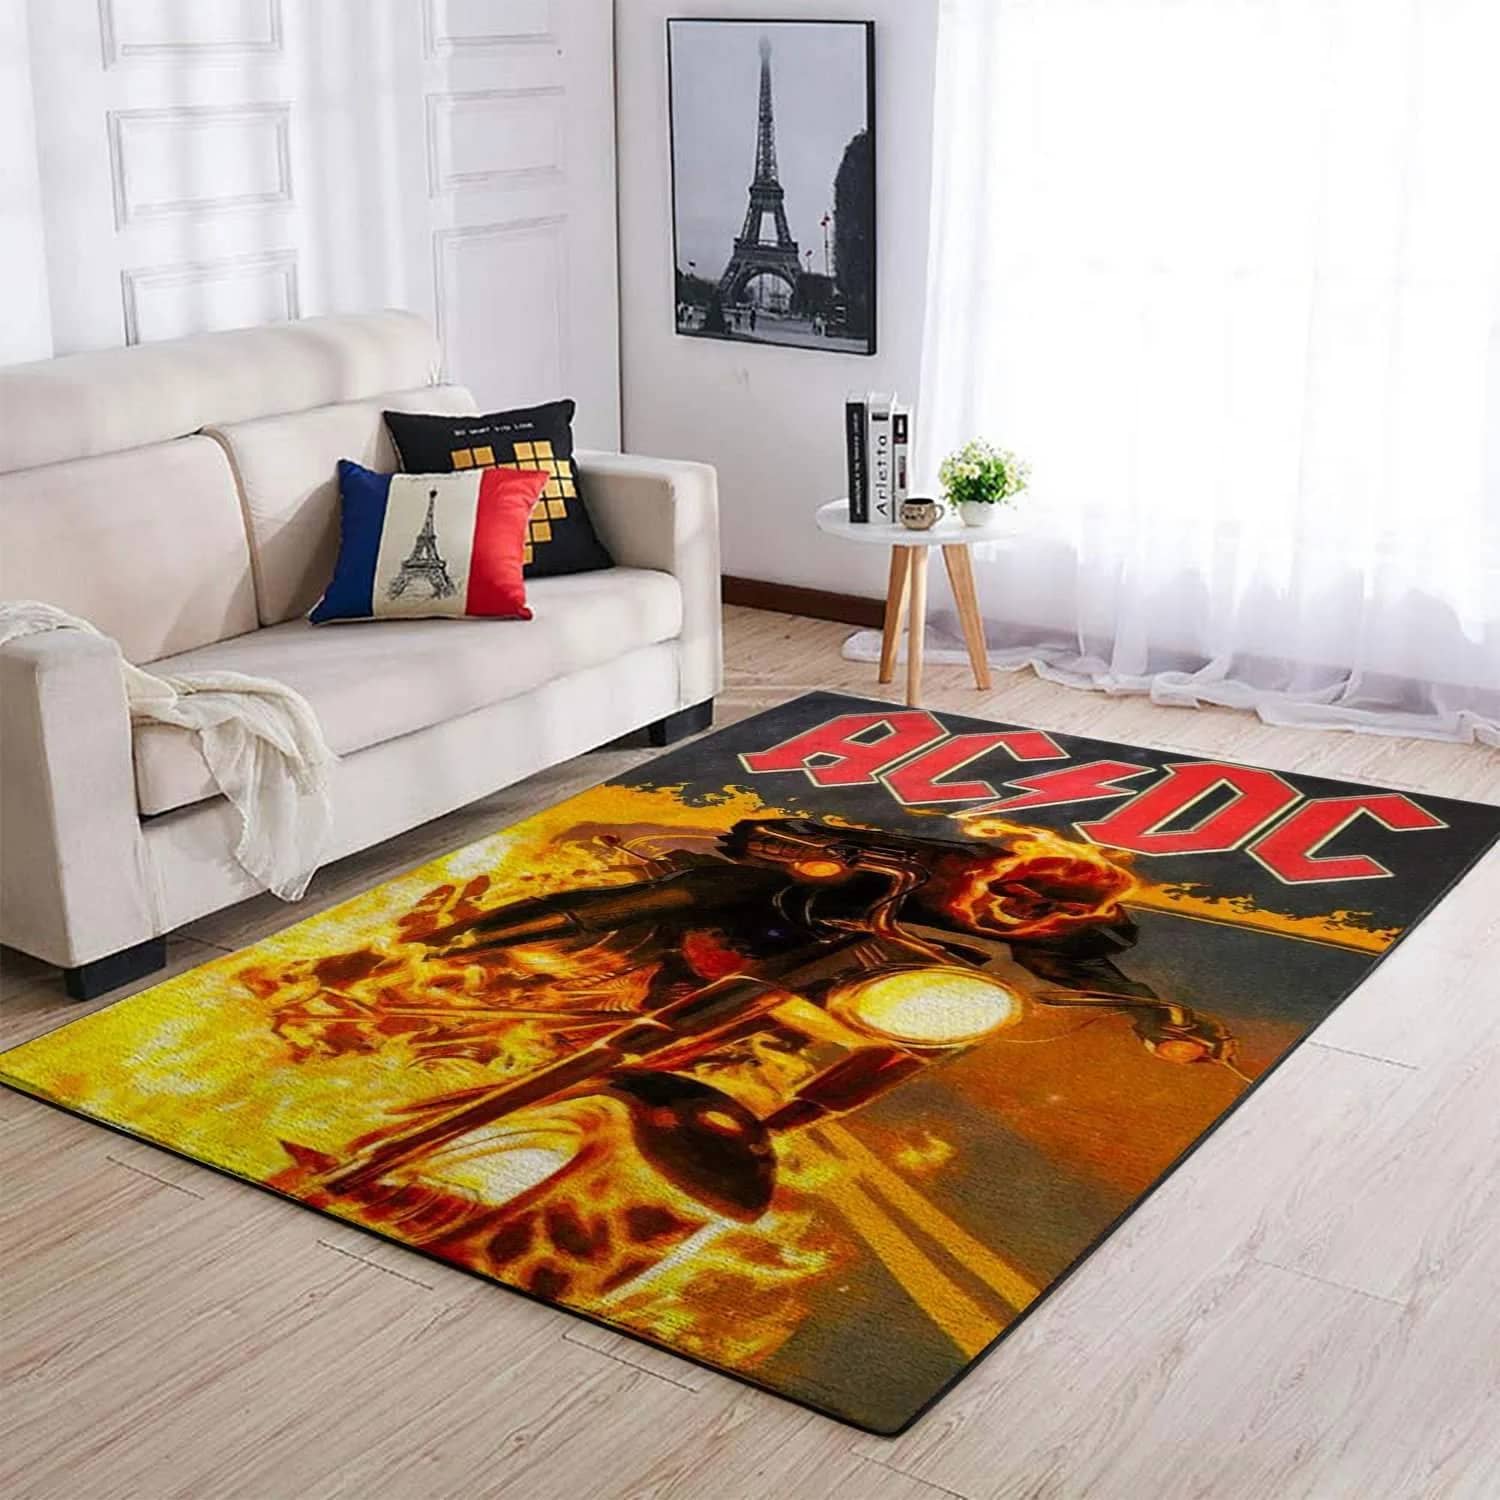 Acdc Limited Edition Amazon Best Seller Sku 262093 Rug